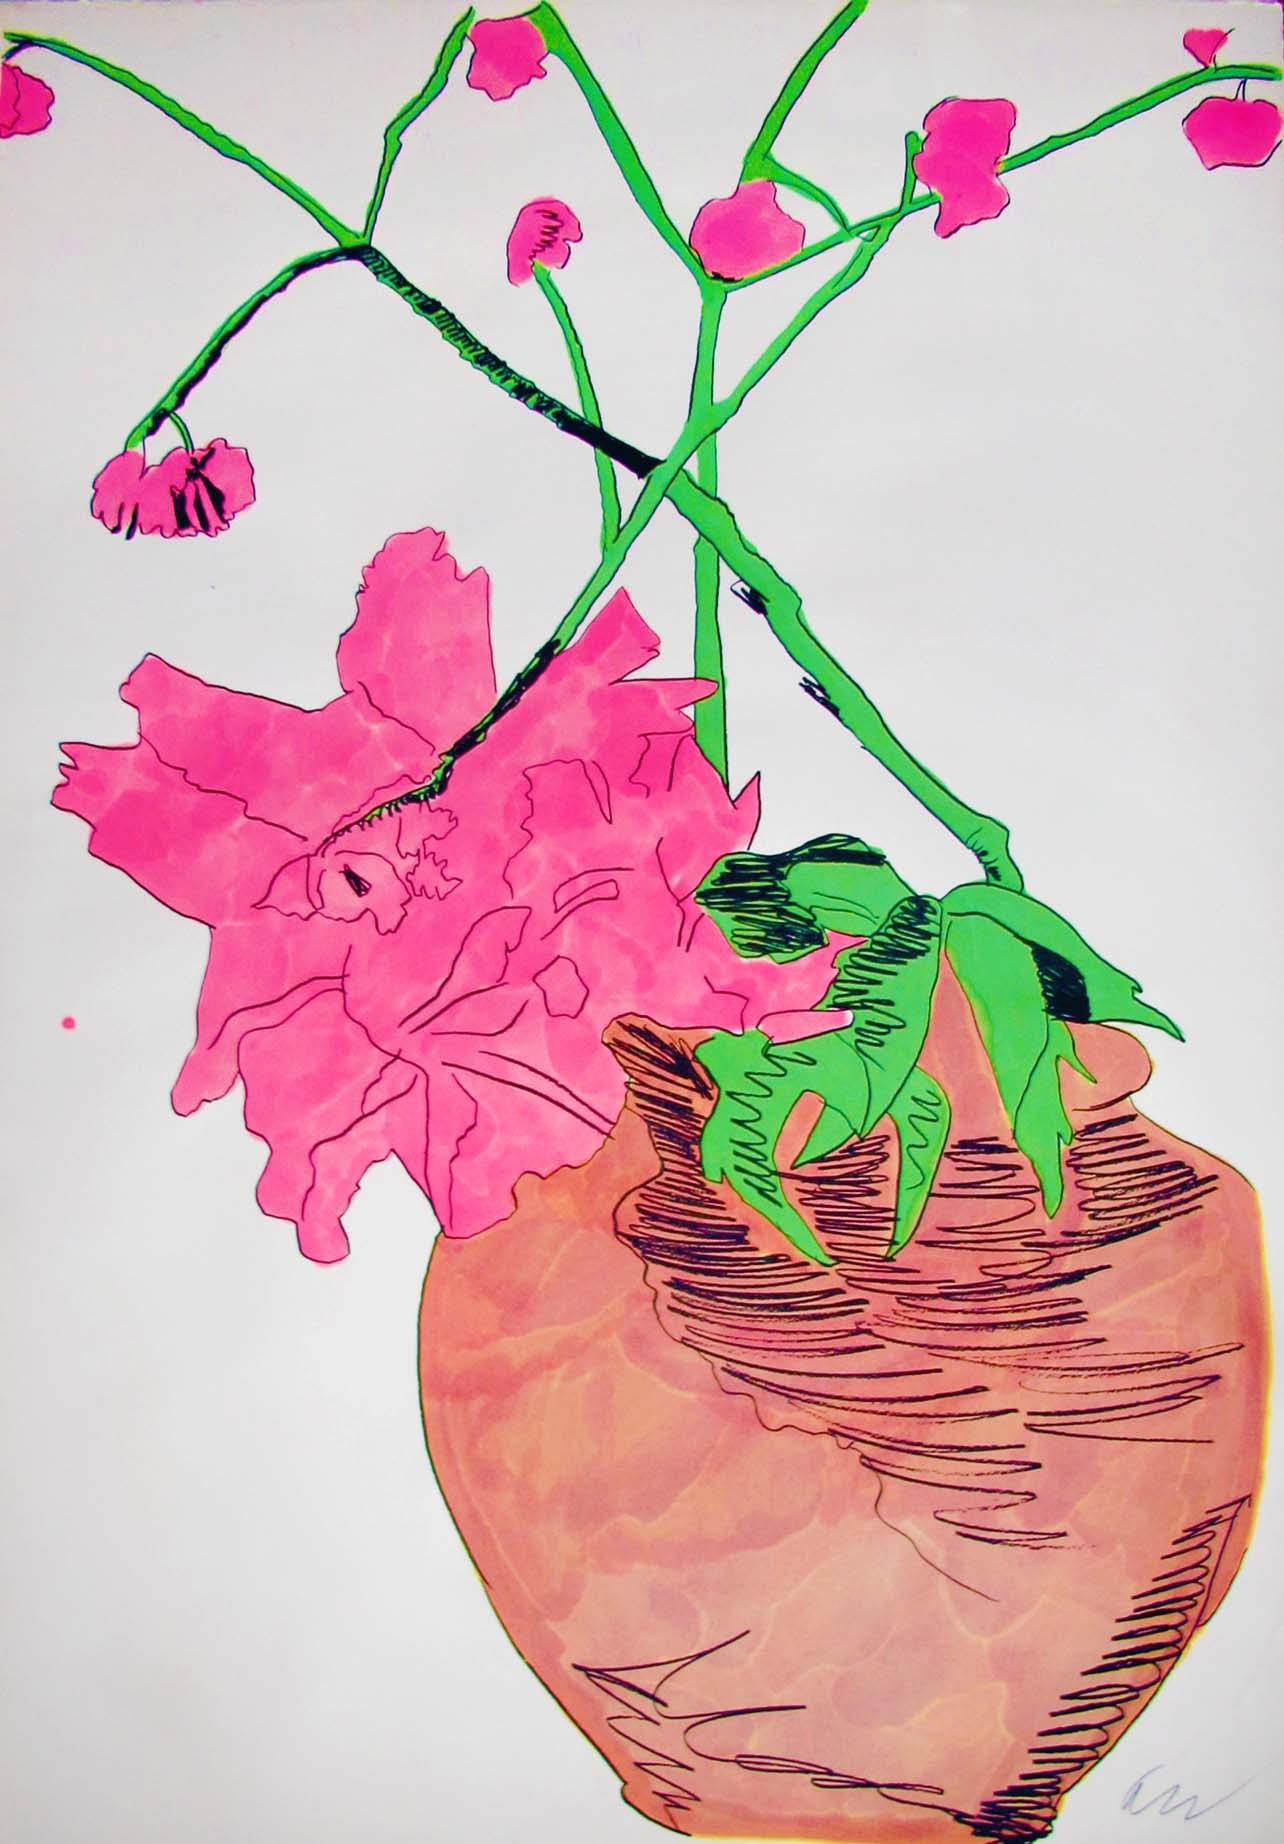 Andy Warhol | Flowers | Hand Colored | 119 | 1974 | Image of Artists' work.